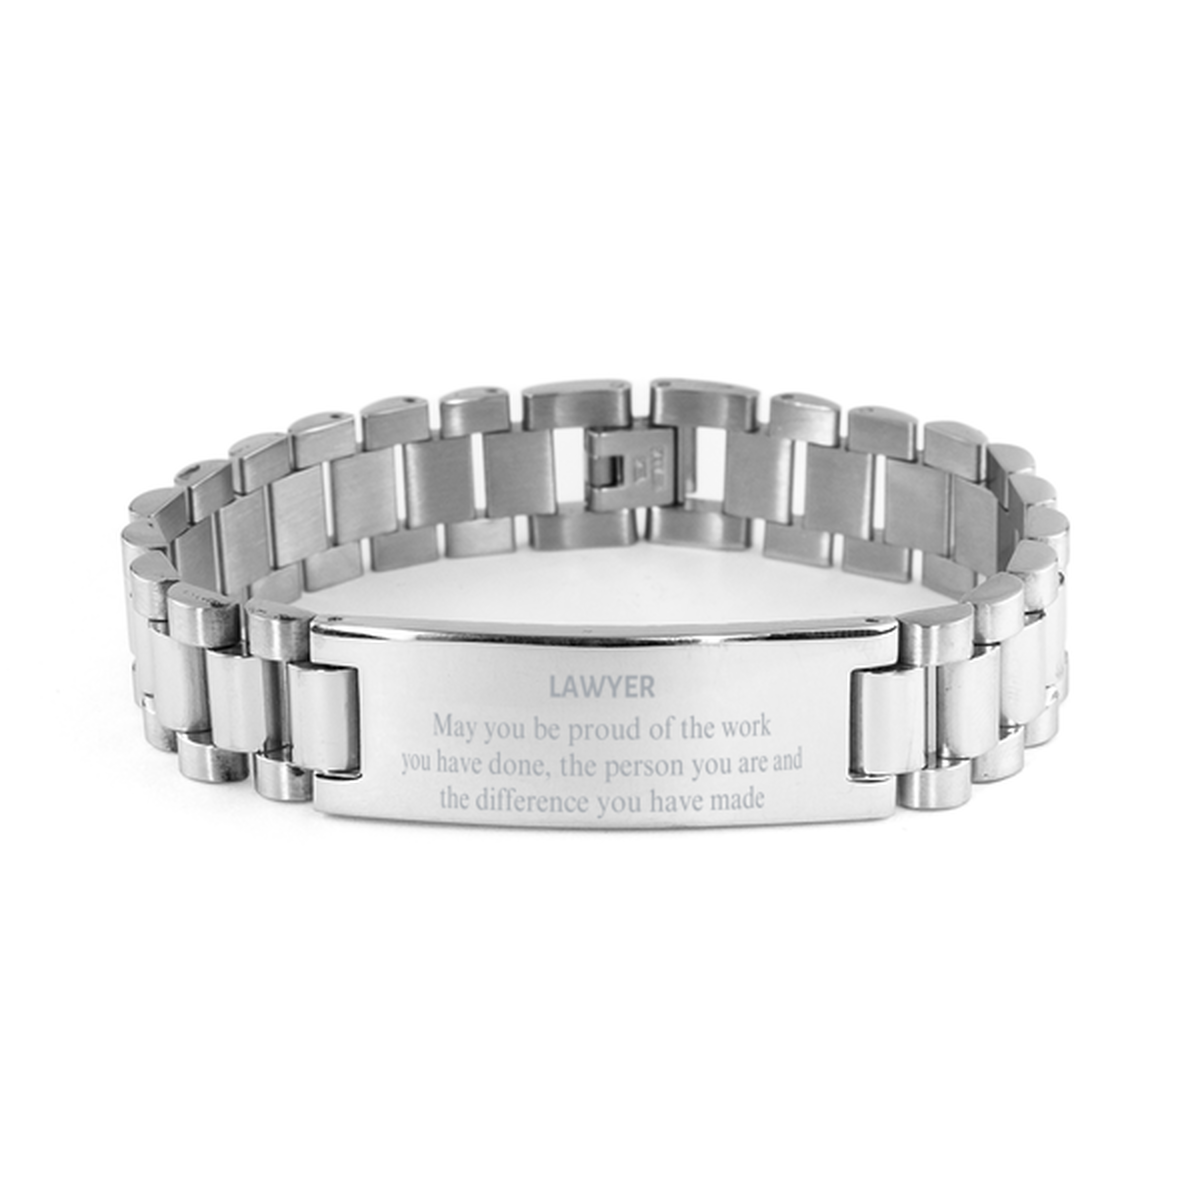 Lawyer May you be proud of the work you have done, Retirement Lawyer Ladder Stainless Steel Bracelet for Colleague Appreciation Gifts Amazing for Lawyer